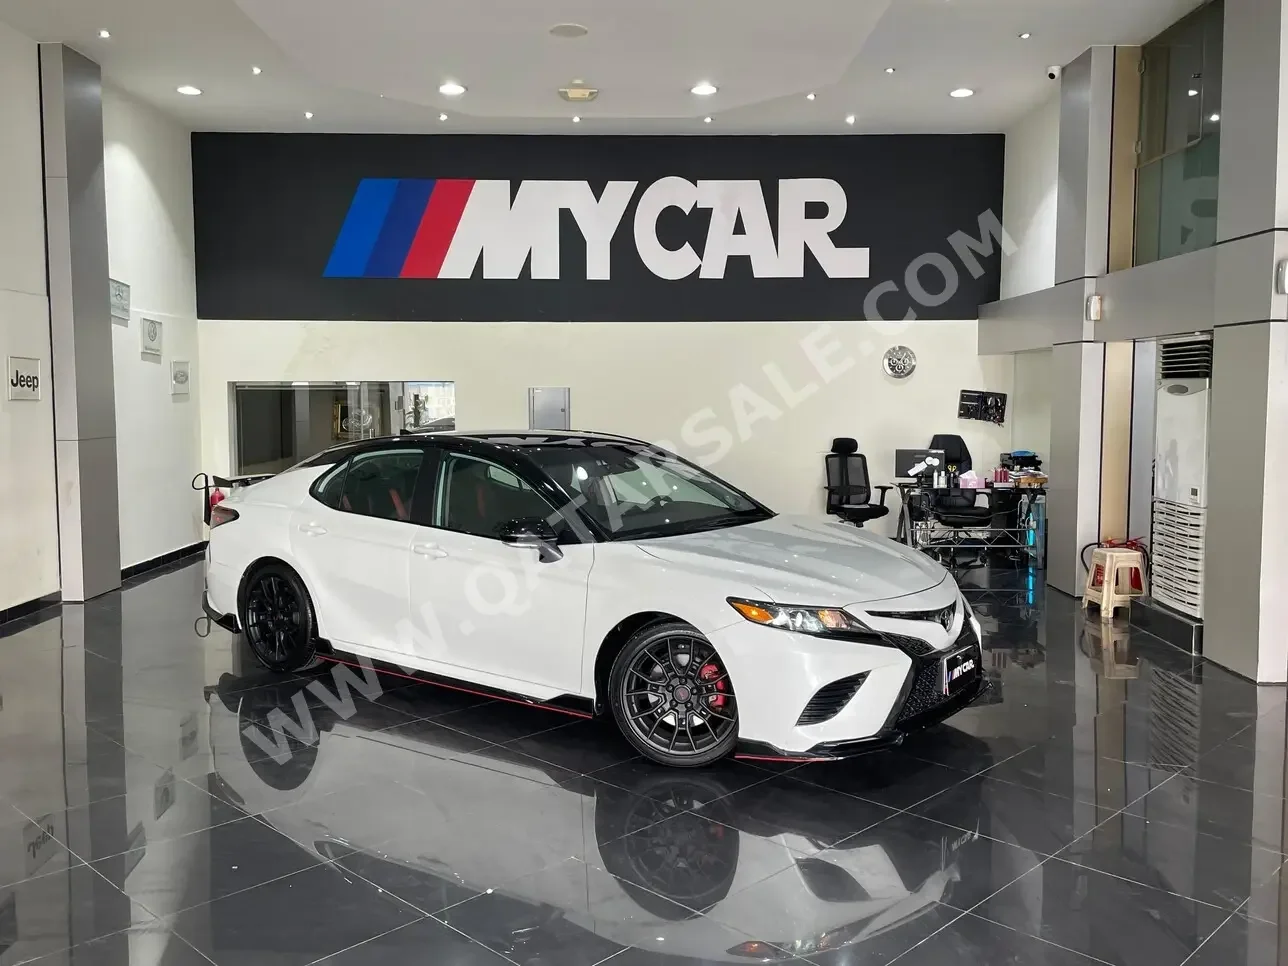 Toyota  Camry  TRD  2021  Automatic  42,000 Km  6 Cylinder  Front Wheel Drive (FWD)  Sedan  White